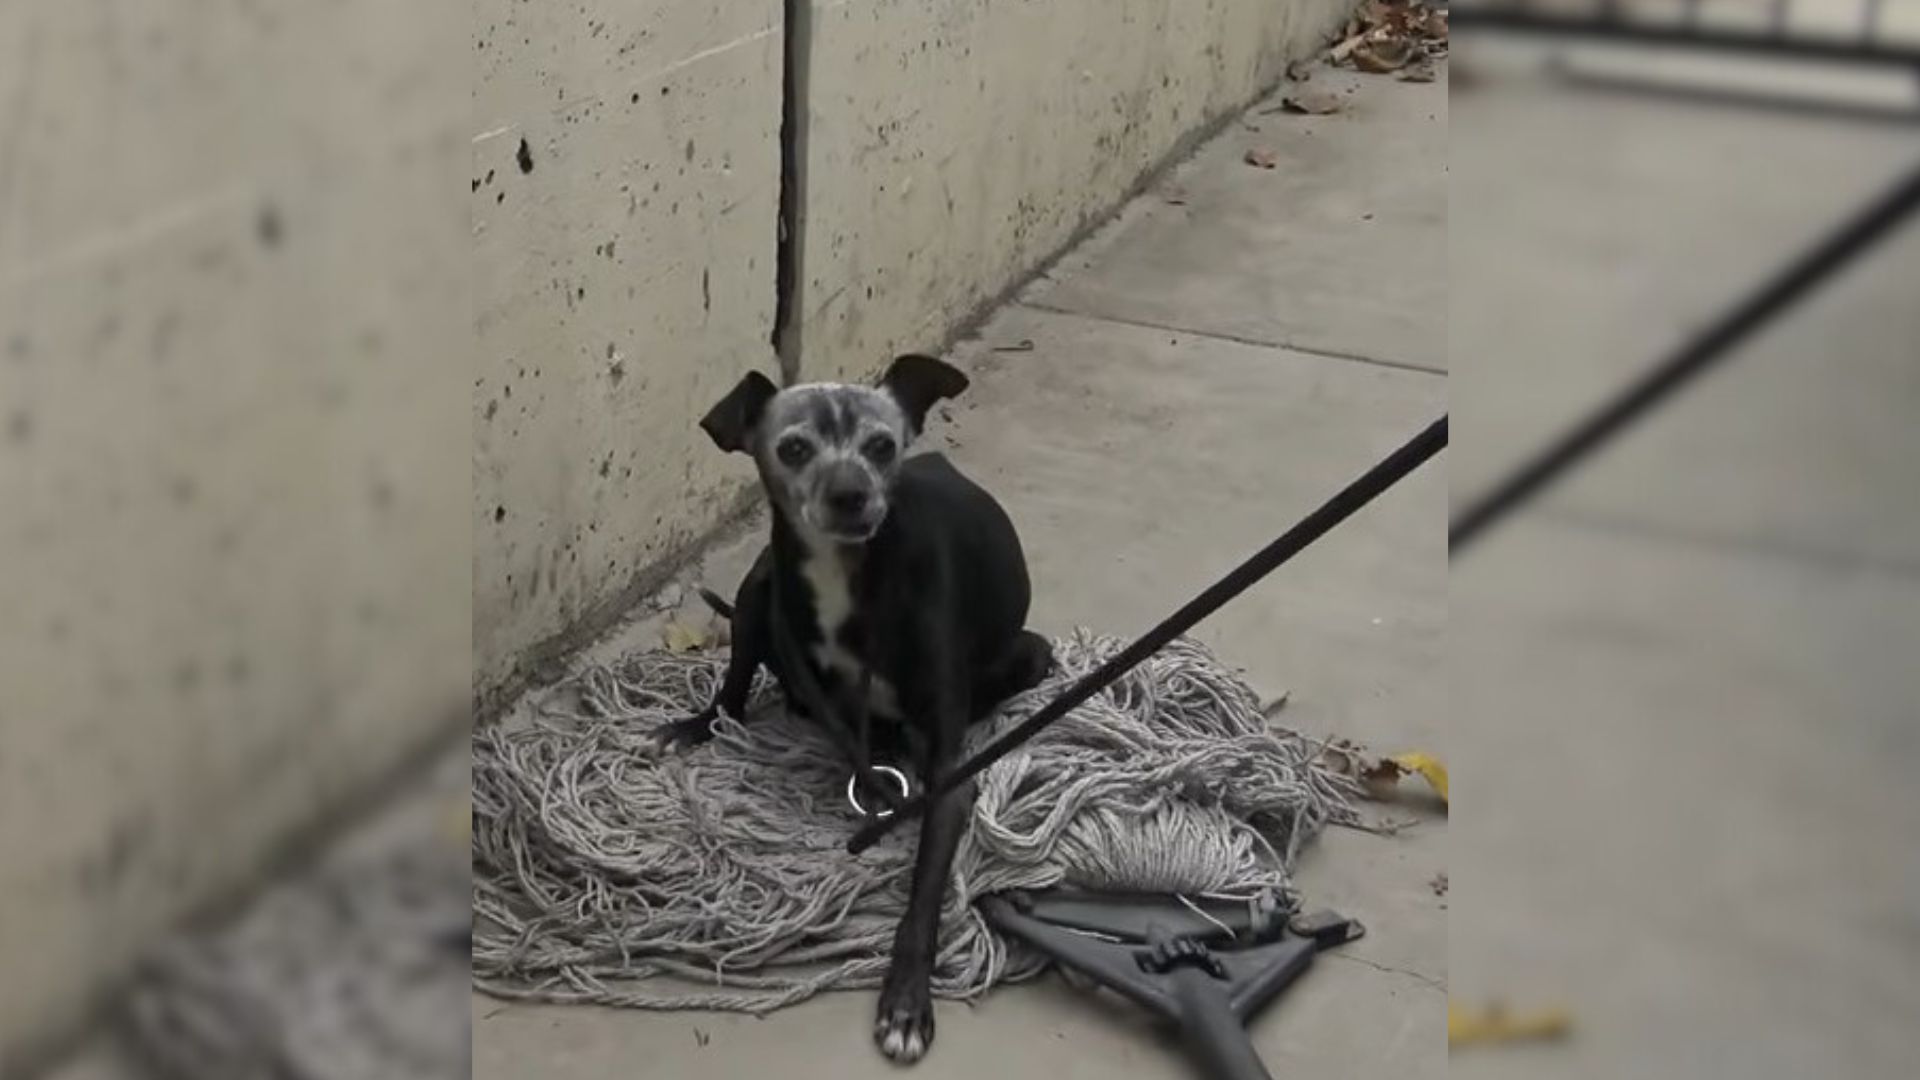 Rescuers From California Were Shocked When They Found An Injured Dog Lying On A Mop So They Went To Help